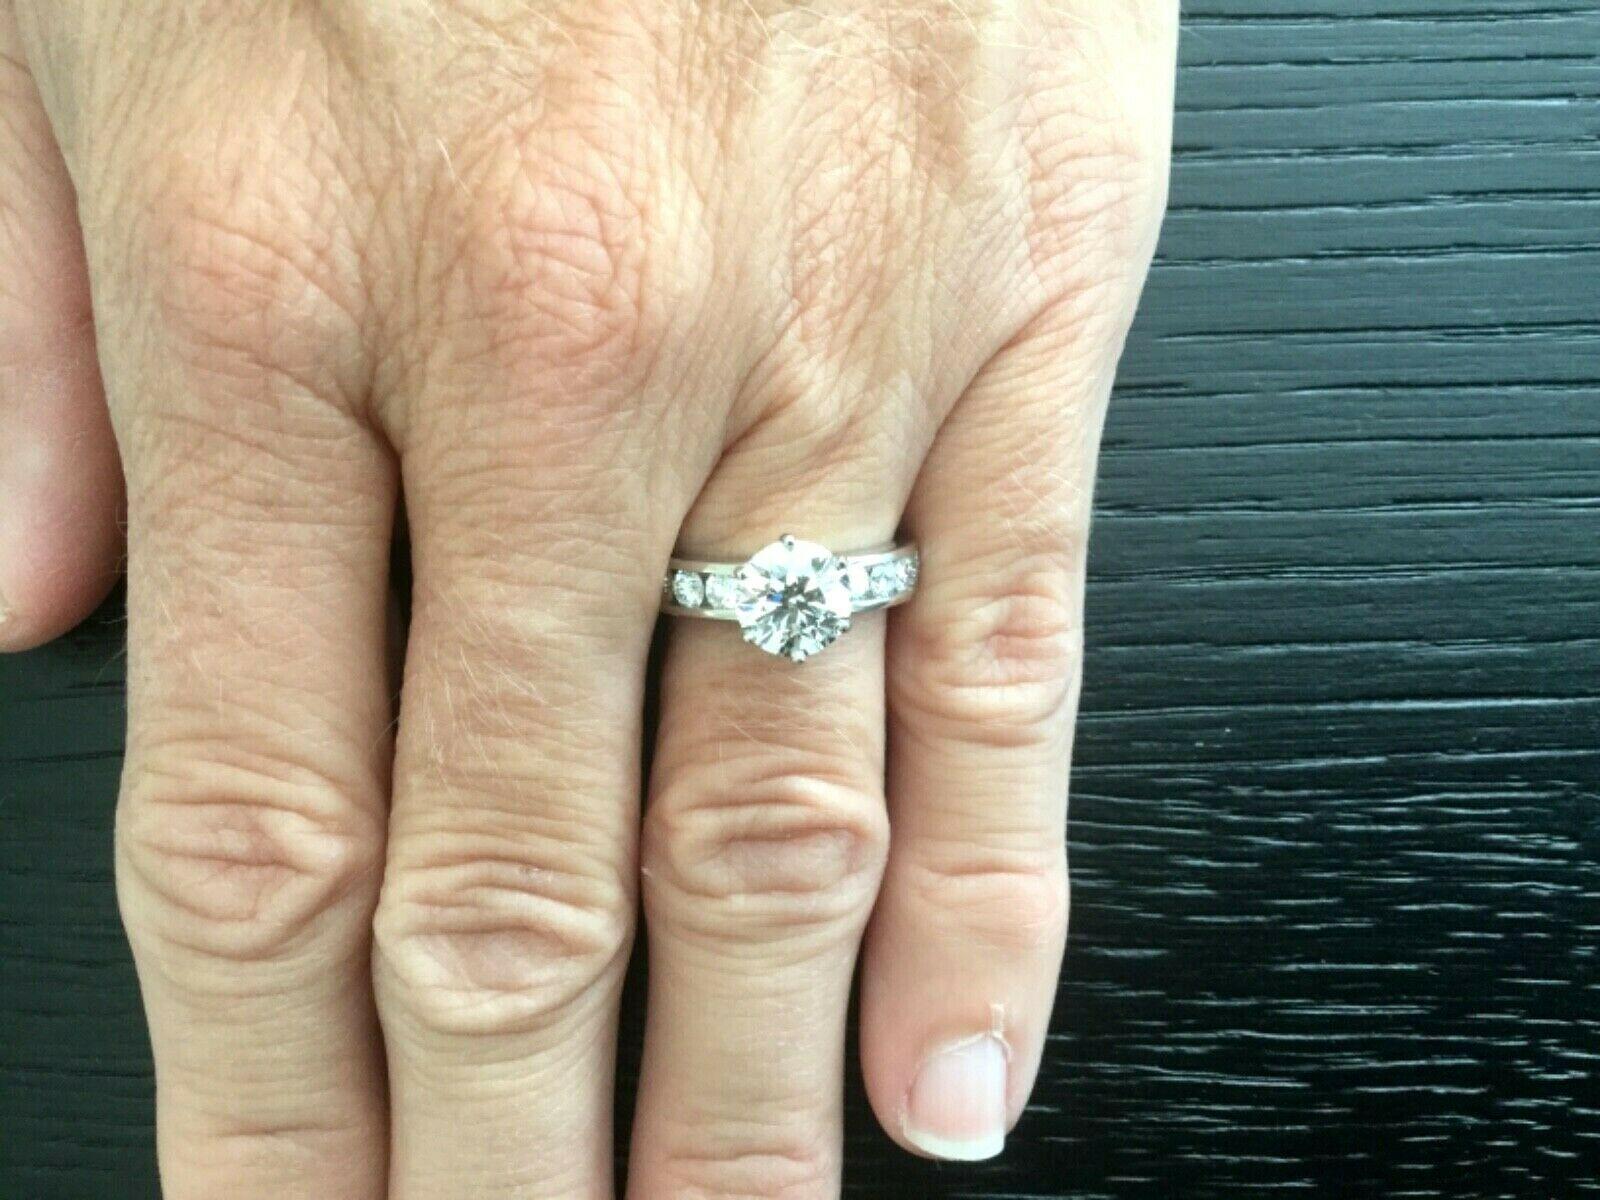 Tiffany & Co. Platinum Diamond 1.47 Carat Round Engagement Ring G VVS2 Triple Ex In Excellent Condition For Sale In Middletown, DE